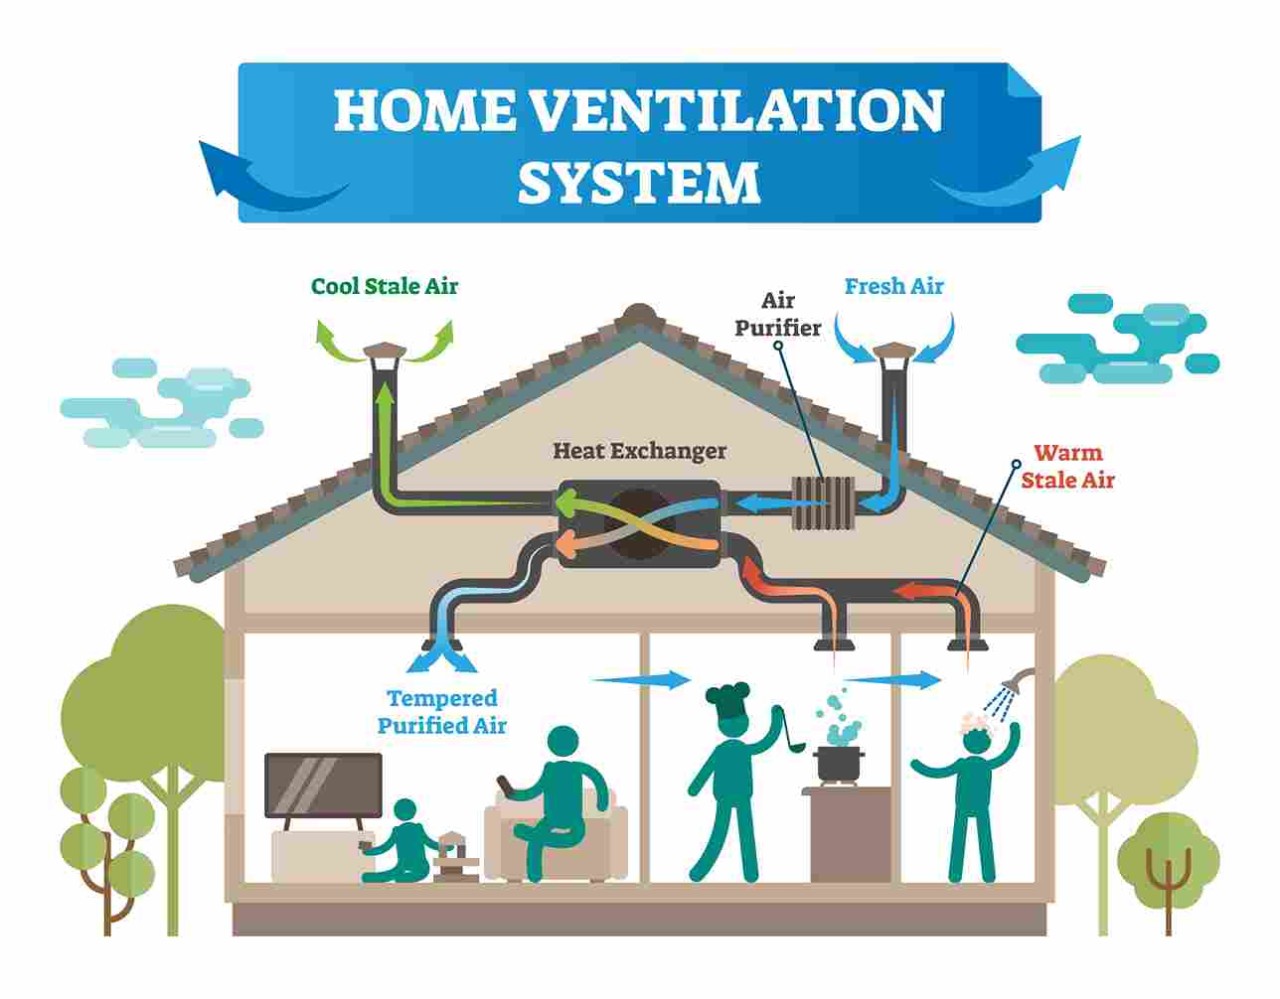 Home Ventilation Systems Explanation | UltraTech Cement